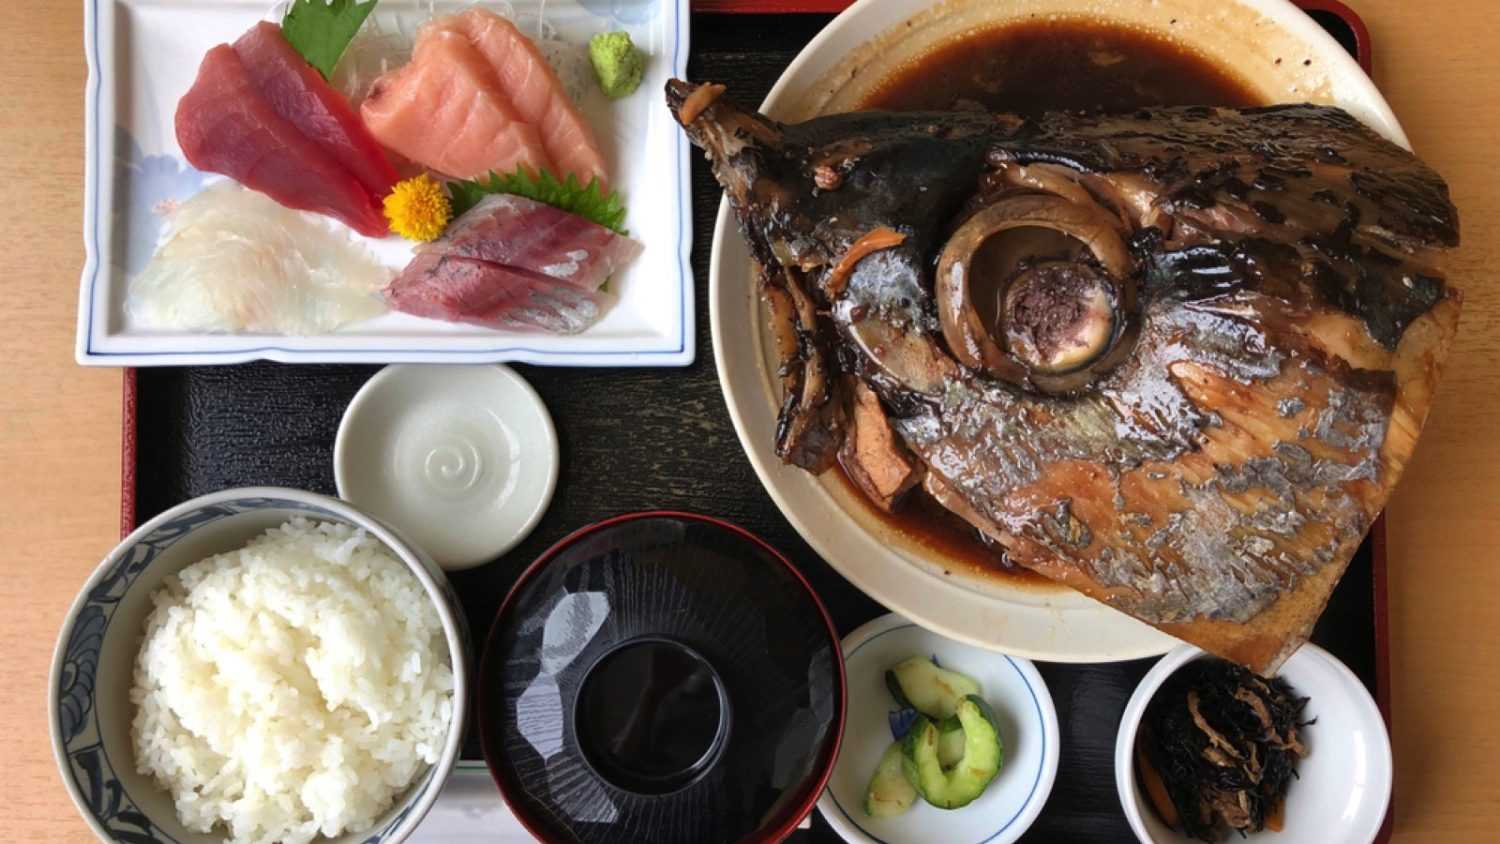 Japanese cuisine lunch set menu with simmered tuna head and assorted sashimi serve with rice, soup and pickles in tray. Simmered in the Japanese style called nitsuke.